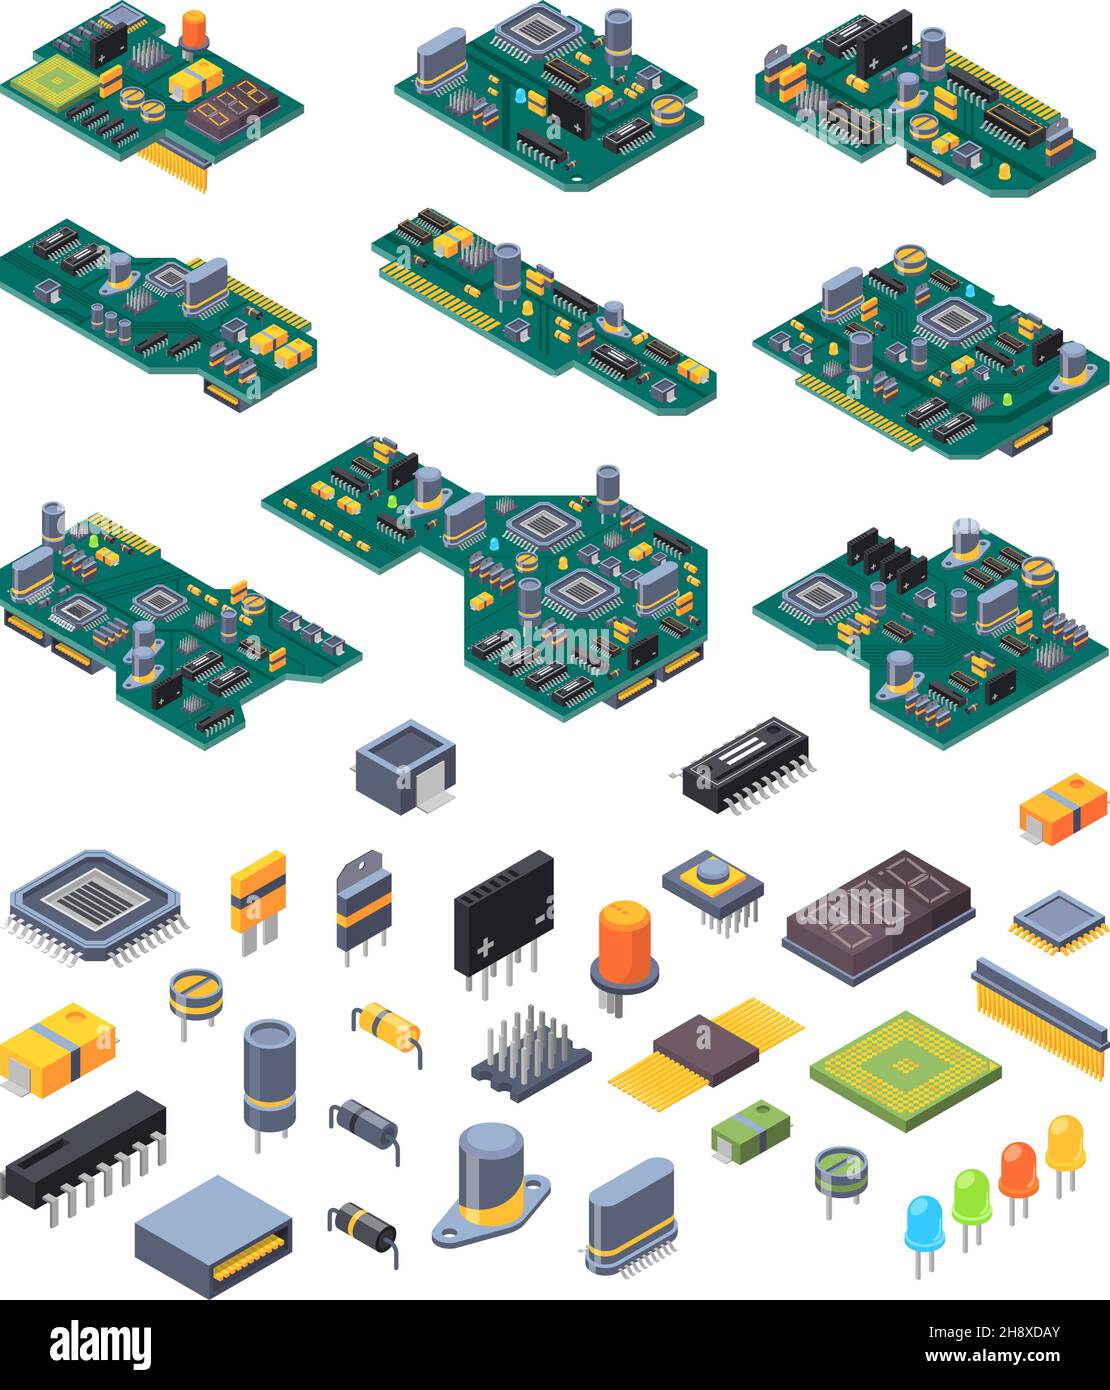 Microchip hardware. Manufacturing computer power green motherboards with small chip for electronic devices garish vector isometric illustrations Stock Vector